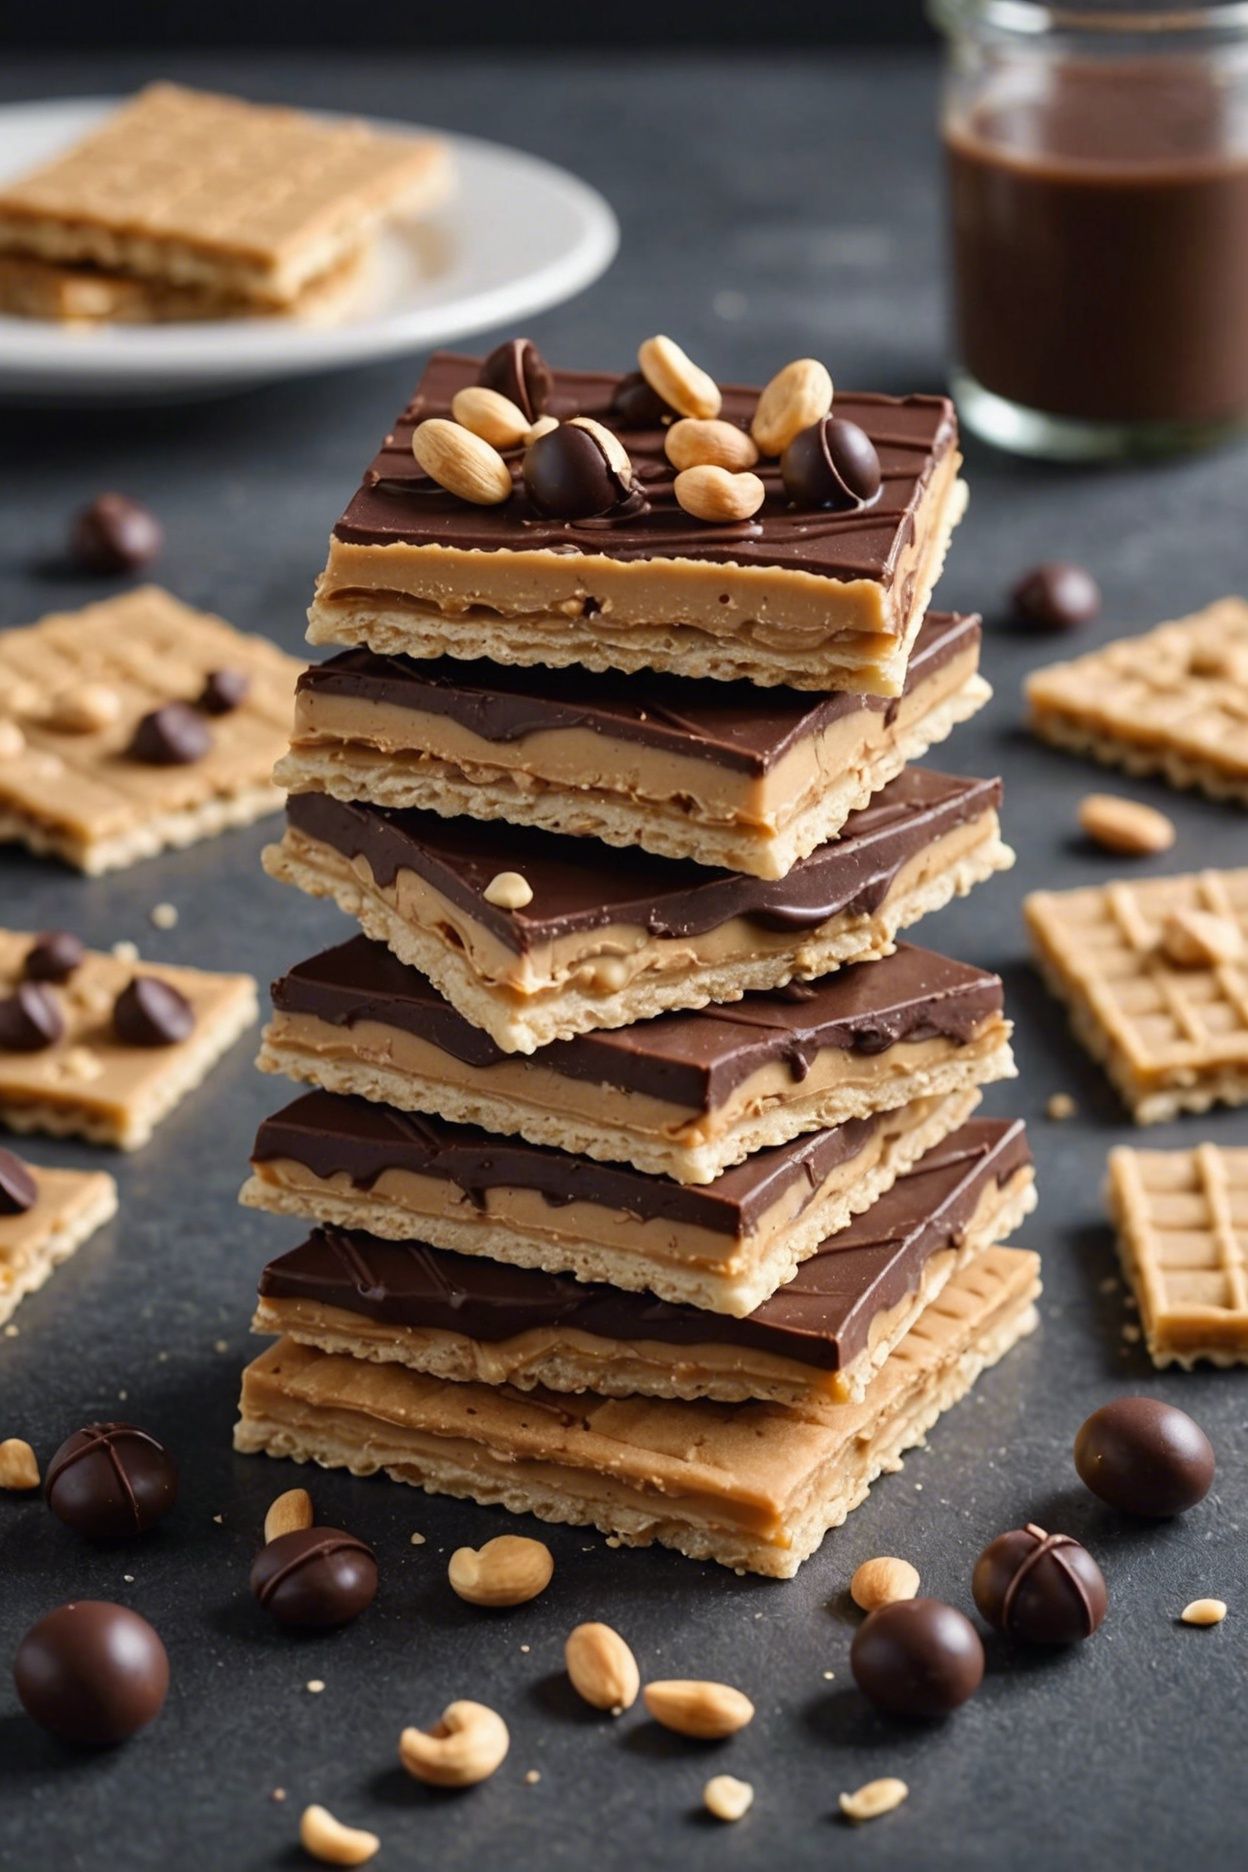 Chocolate Coated Peanut Butter Crackers